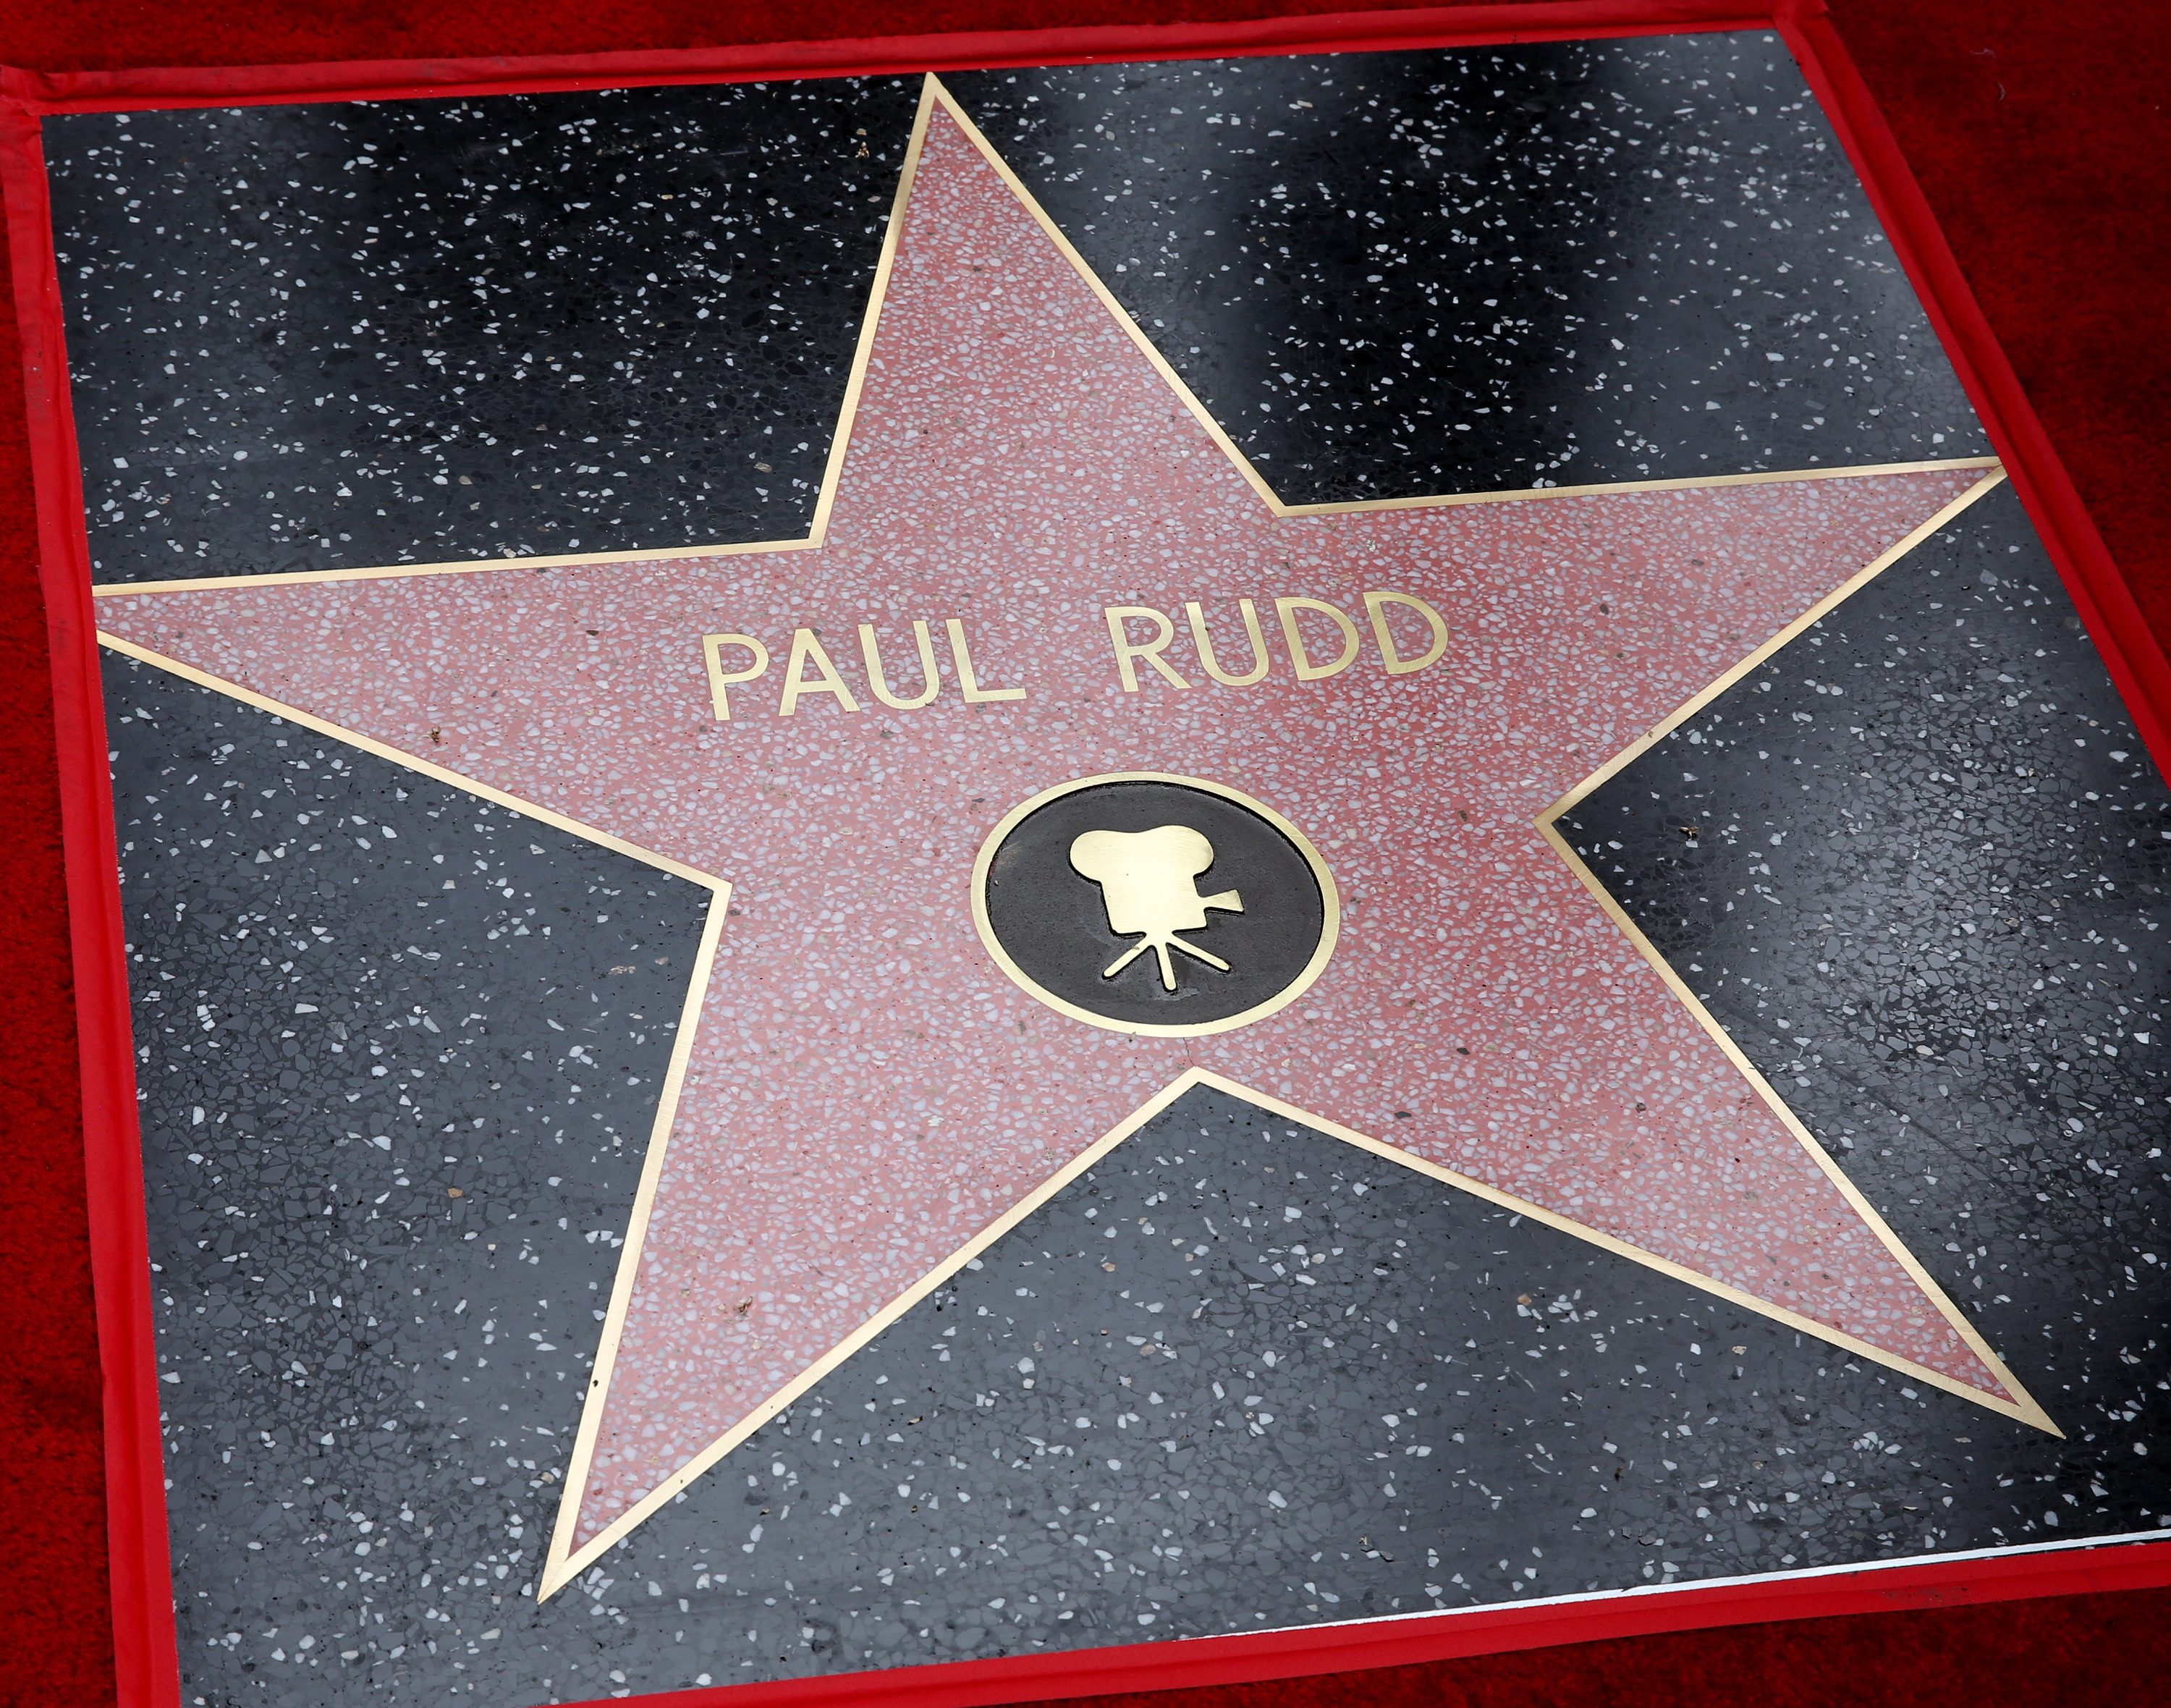 Paul Rudd receives Star on Hollywood Walk of Fame – See Pictures!